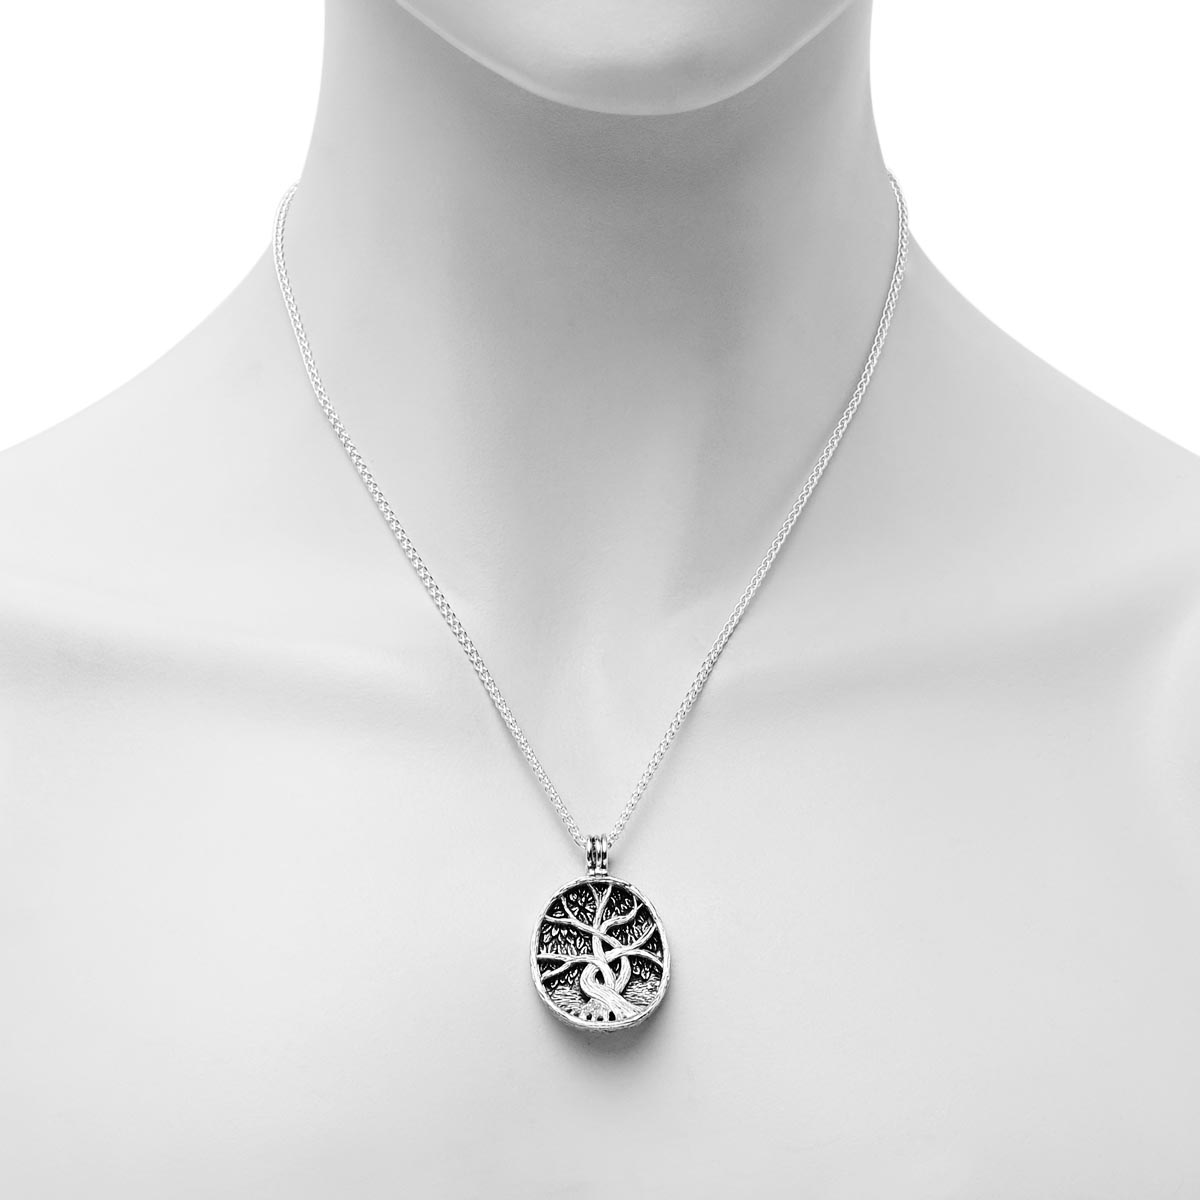 Keith Jack Four Way Reversible Tree of Life Necklace in Sterling Silver and 22kt Yellow Gold